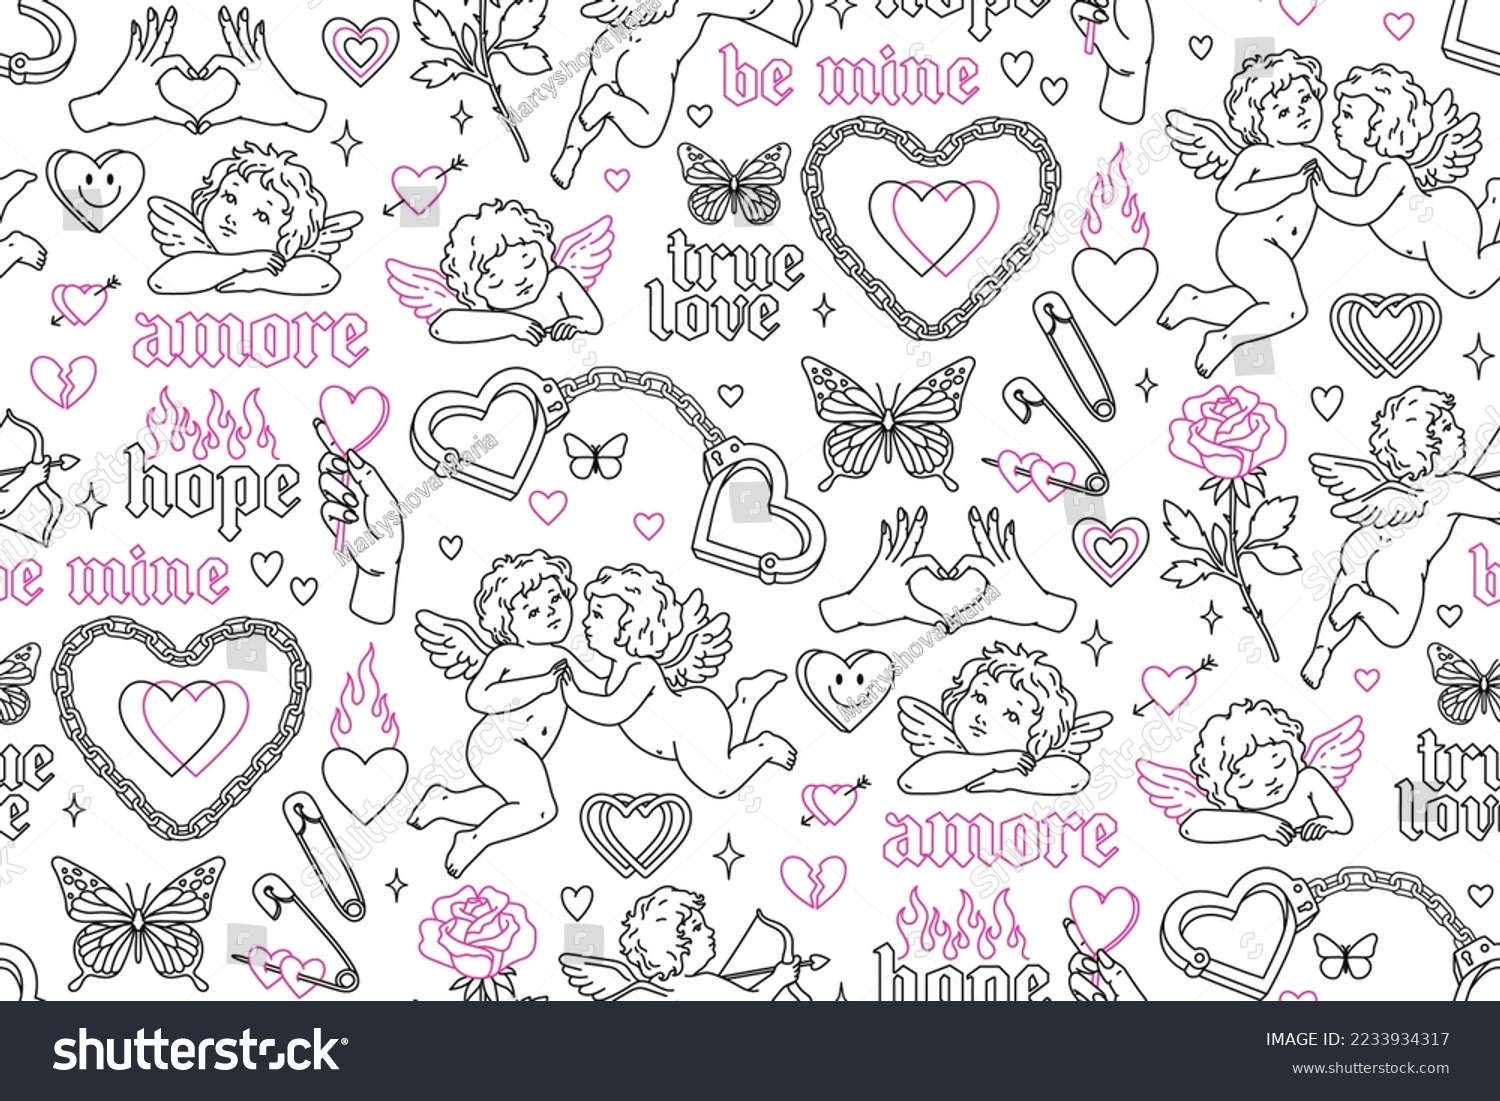 SVG of Tattoo art 1990s-2000s seamless pattern. Love concept. Happy valentines day. Heart, angel, cupid, butterfly, rose in trendy retro style. Vector hand drawn tattoo background. Black, pink, white colors. svg